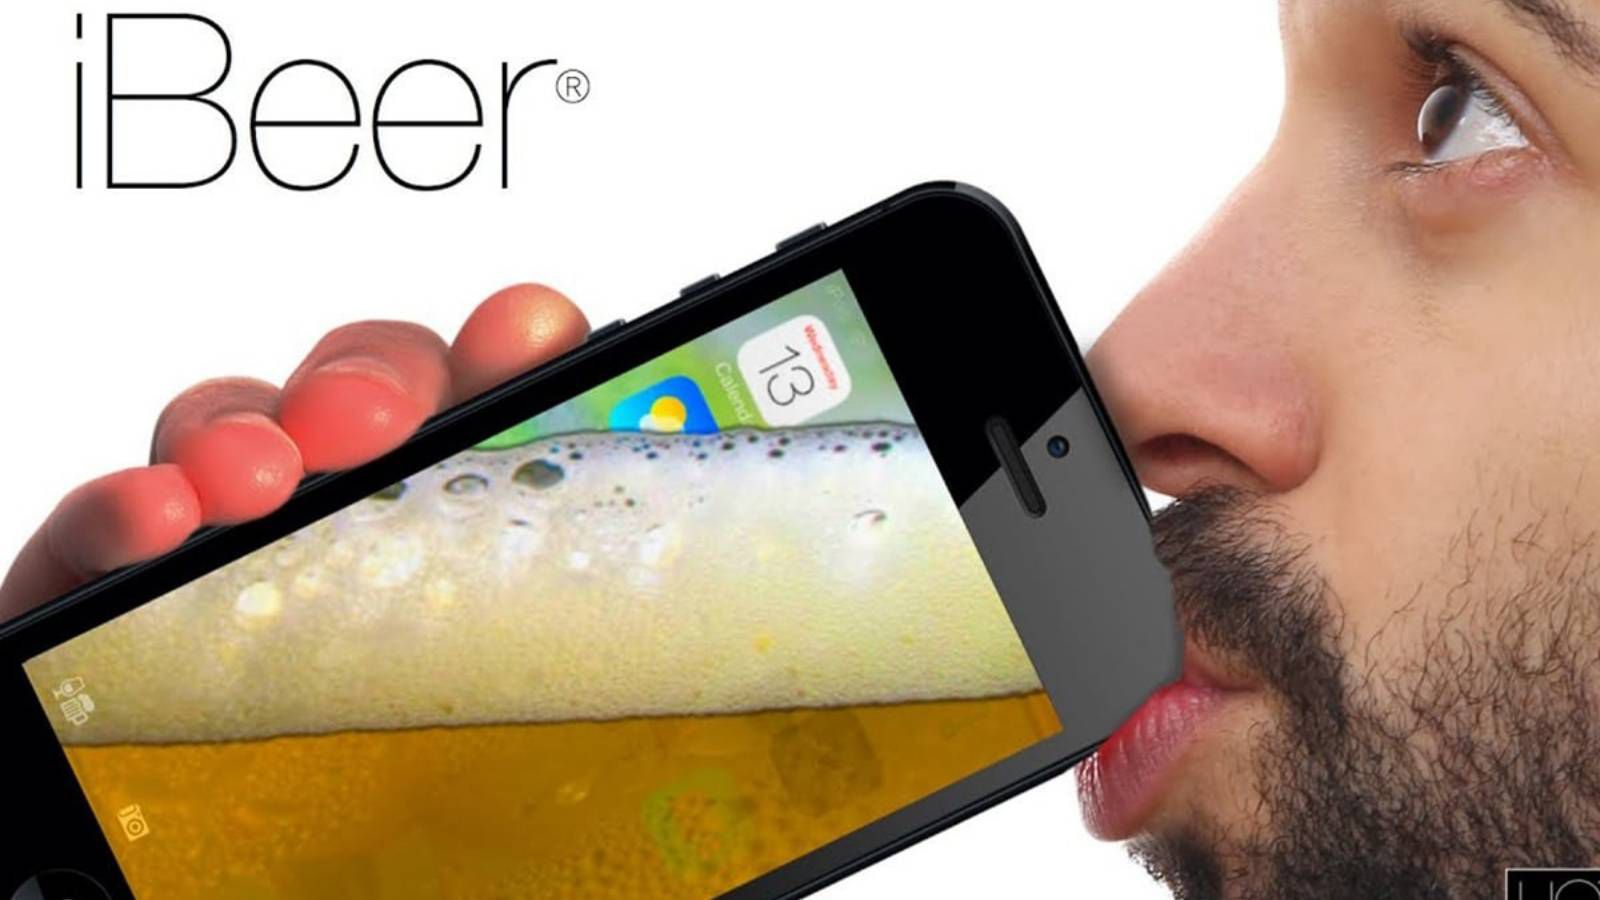 Things That Were Cool 10 Years Ago - Pretending to drink beer from your iPhone 2.